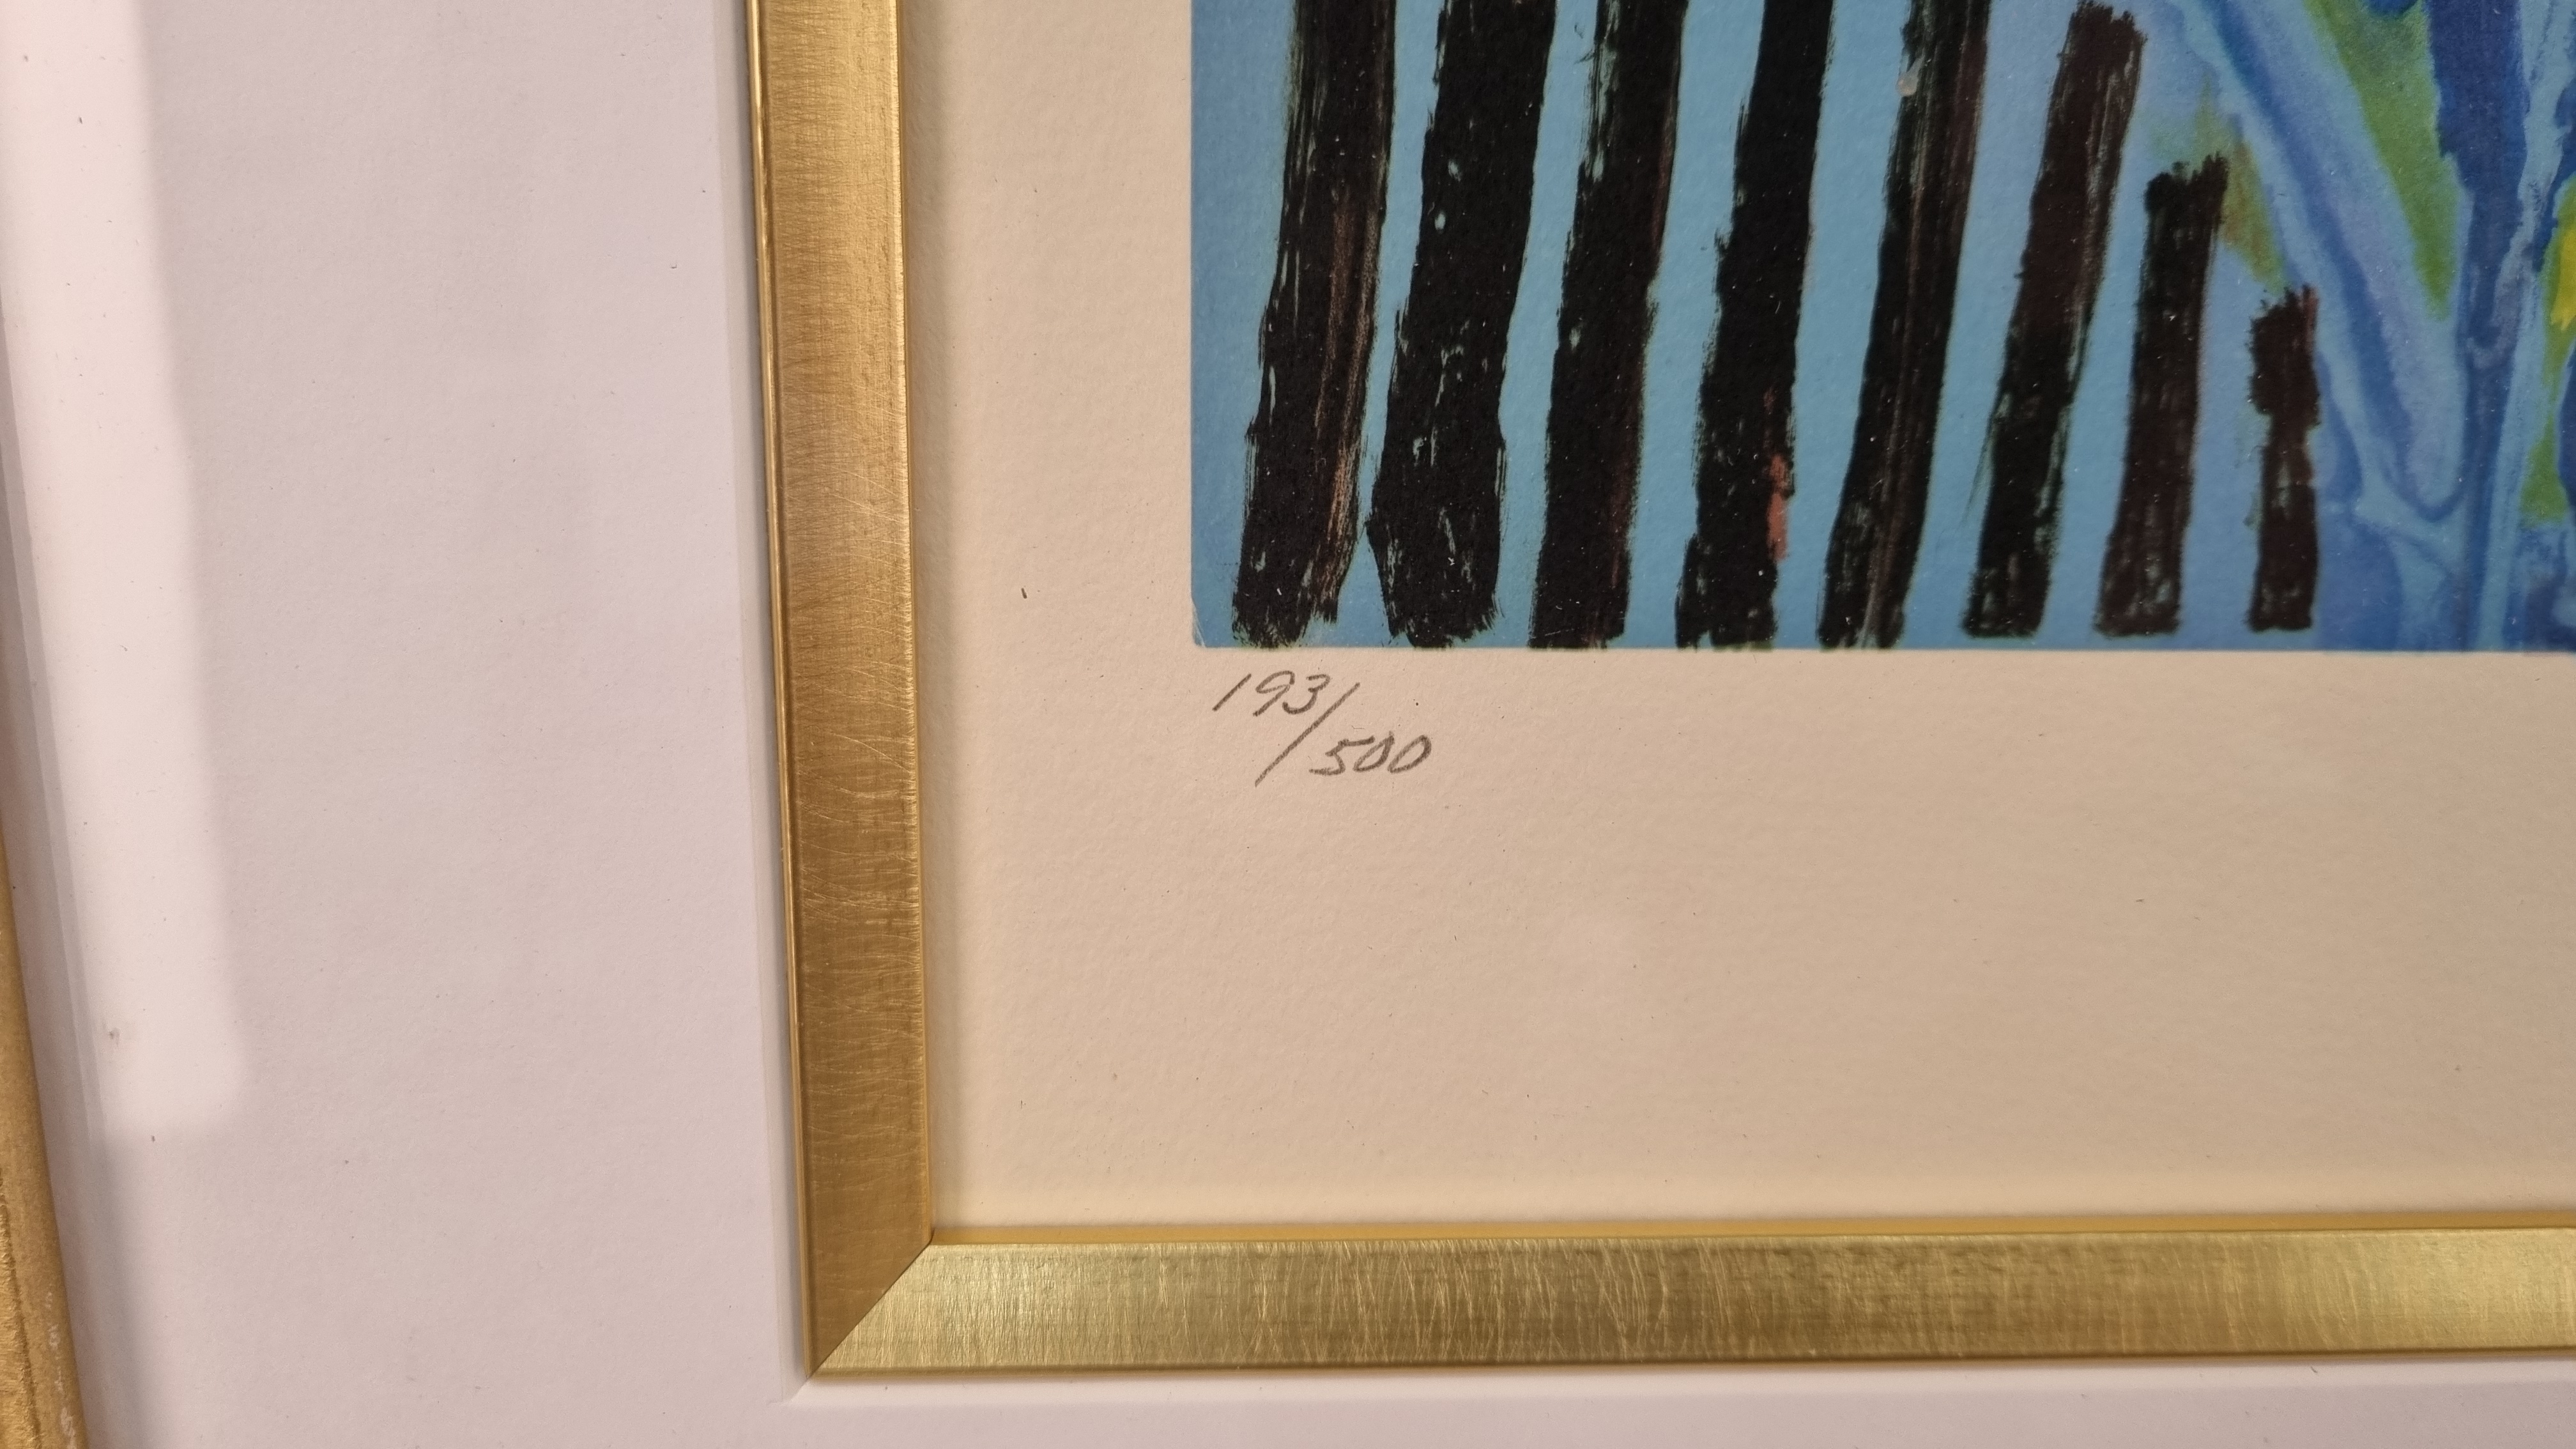 Pablo Picasso Rare Signed Limited Edition From the ""Marina Picasso Collection"" - Image 4 of 7